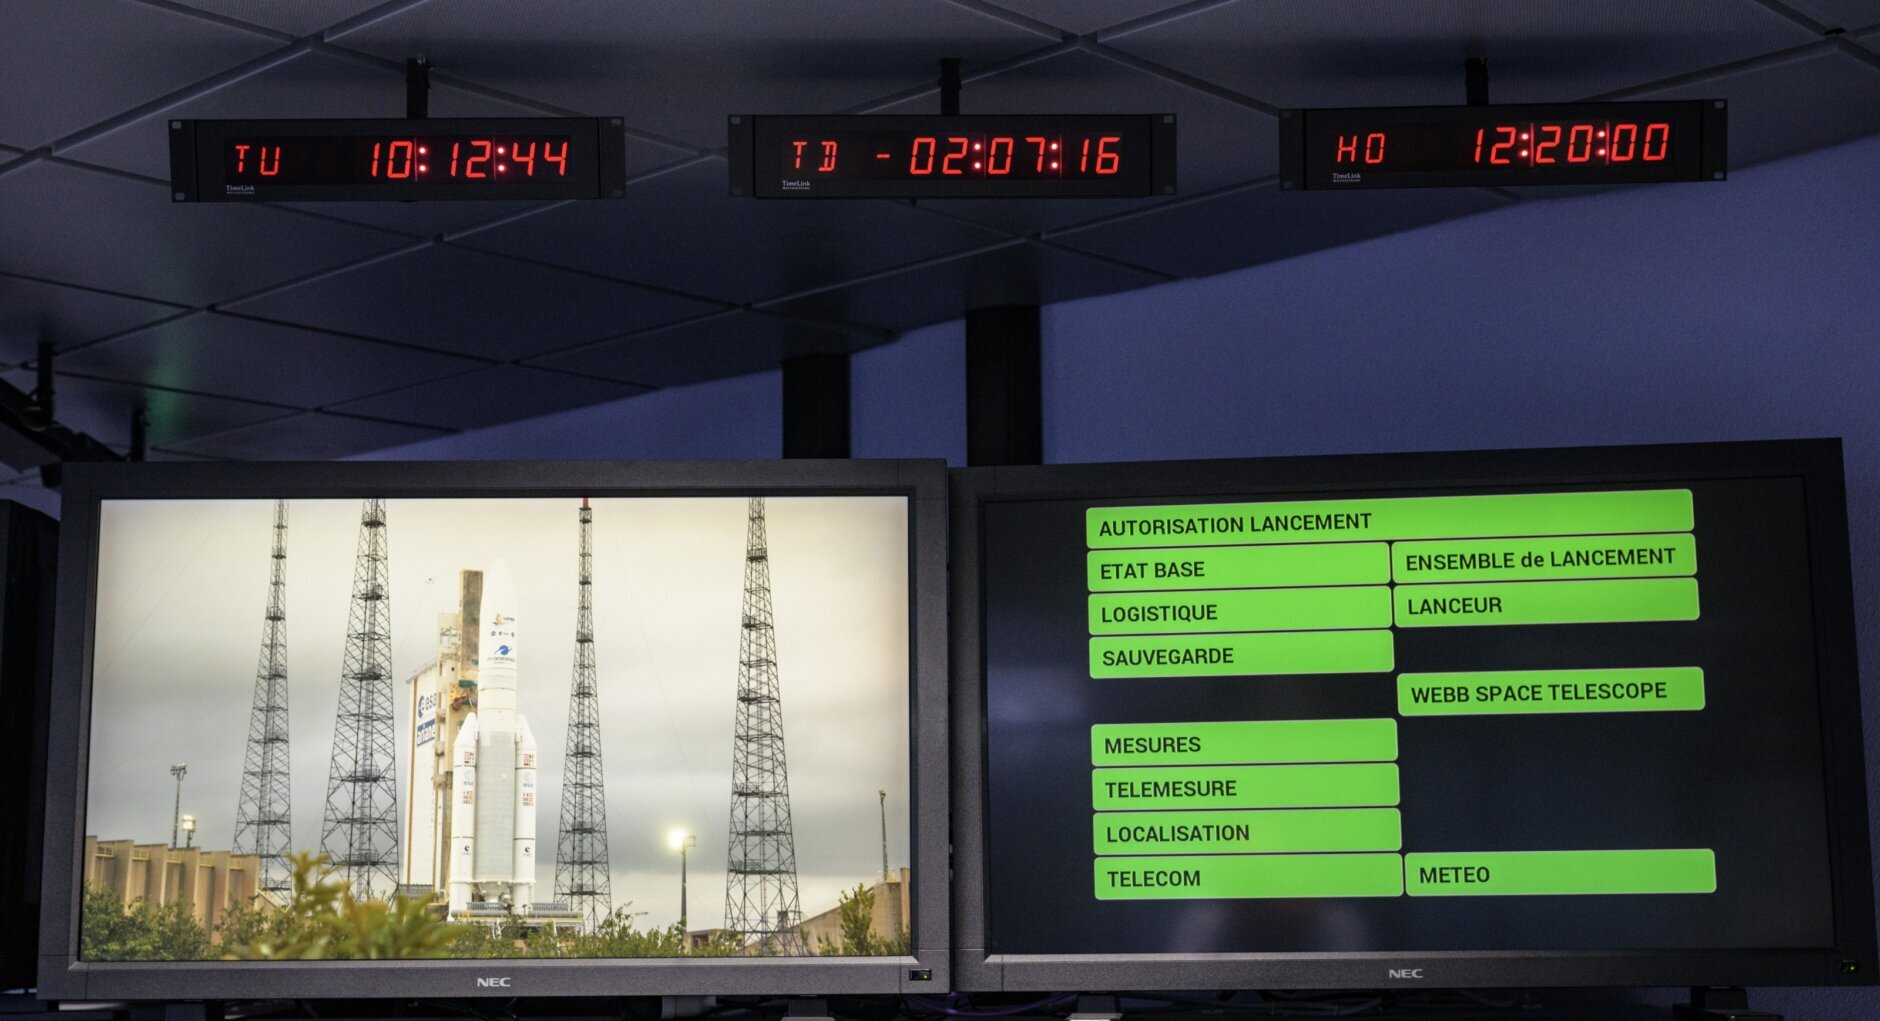 Monitors show the current status ahead of the launch of Arianespace's Ariane 5 rocket carrying NASA's James Webb Space Telescope, Saturday, Dec. 25, 2021, in the Jupiter Center at the Guiana Space Center in Kourou, French Guiana.  The world's largest and most powerful space telescope has blasted off on a high-stakes quest to behold light from the first stars and galaxies. NASA's James Webb Space Telescope rocketed away Saturday from French Guiana in South America.  (NASA/Bill Ingalls/NASA via AP)